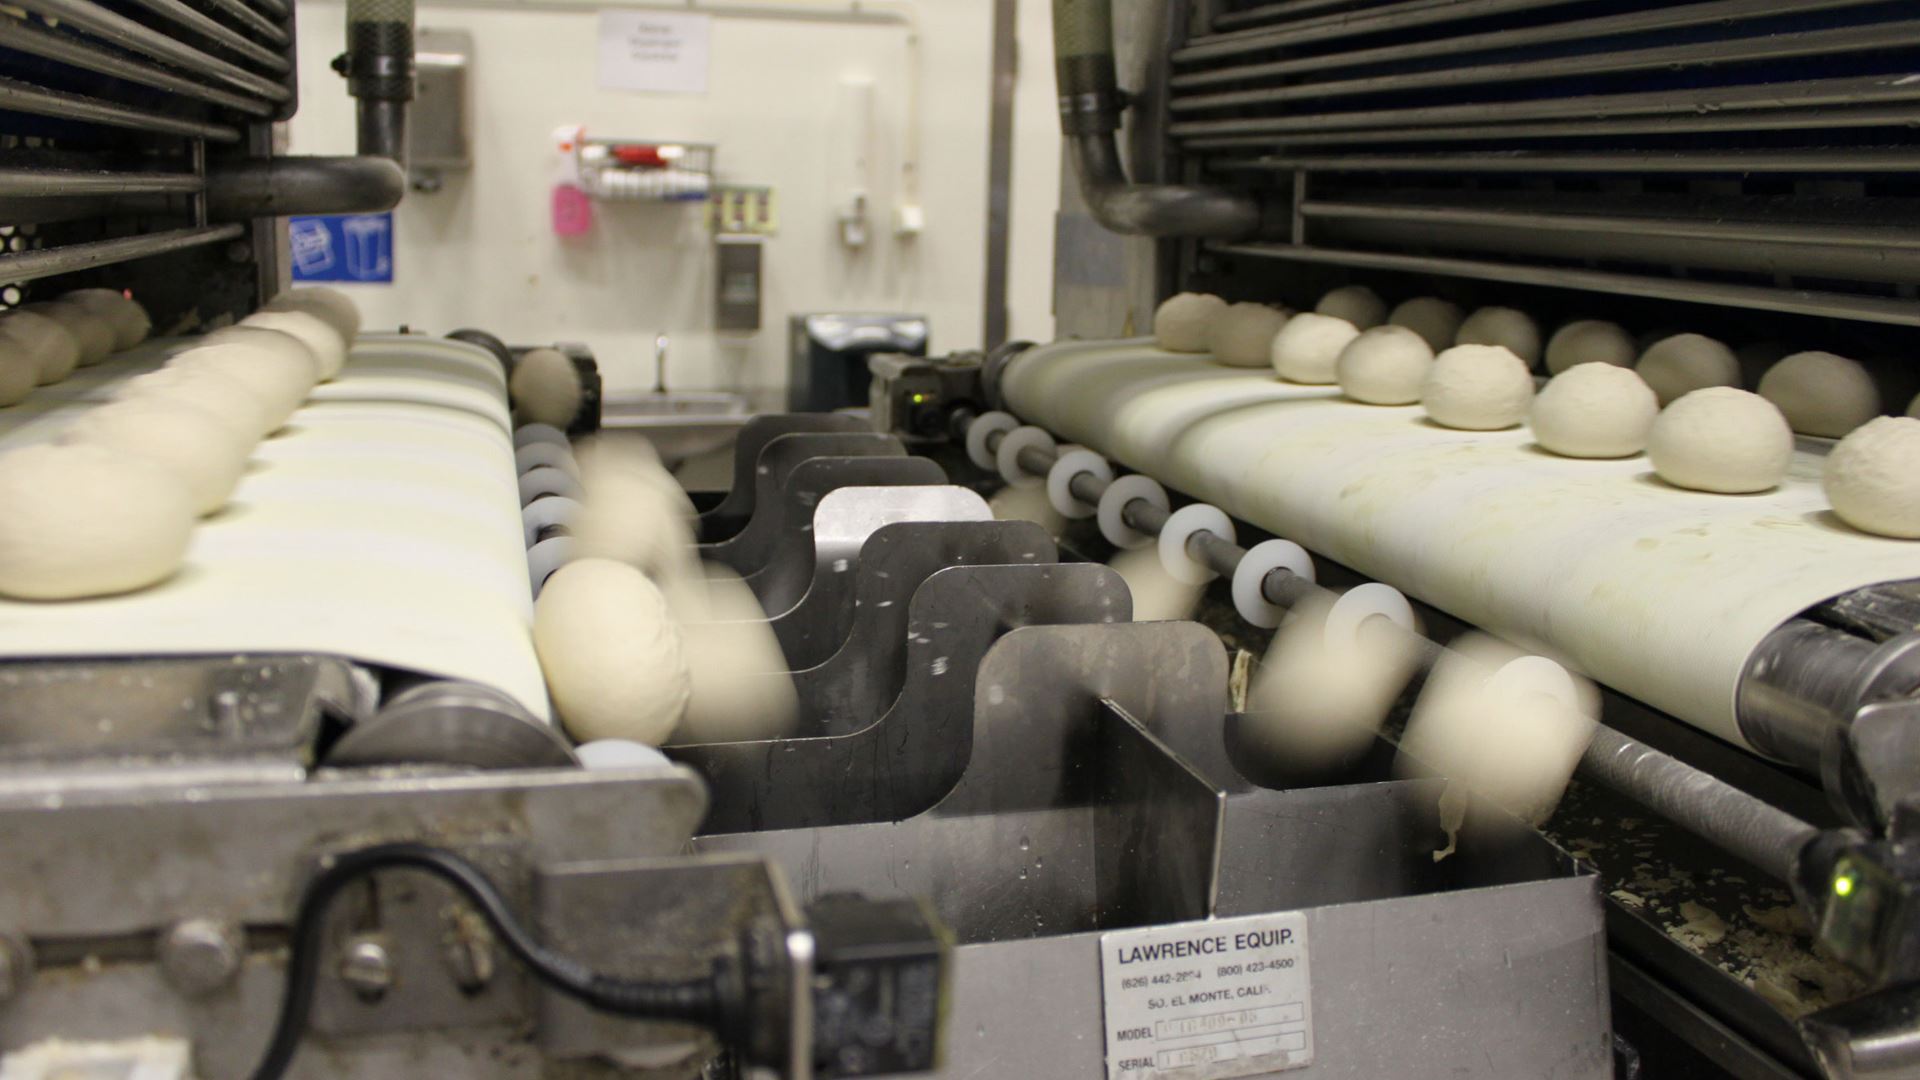 Photo from the tortilla factory.